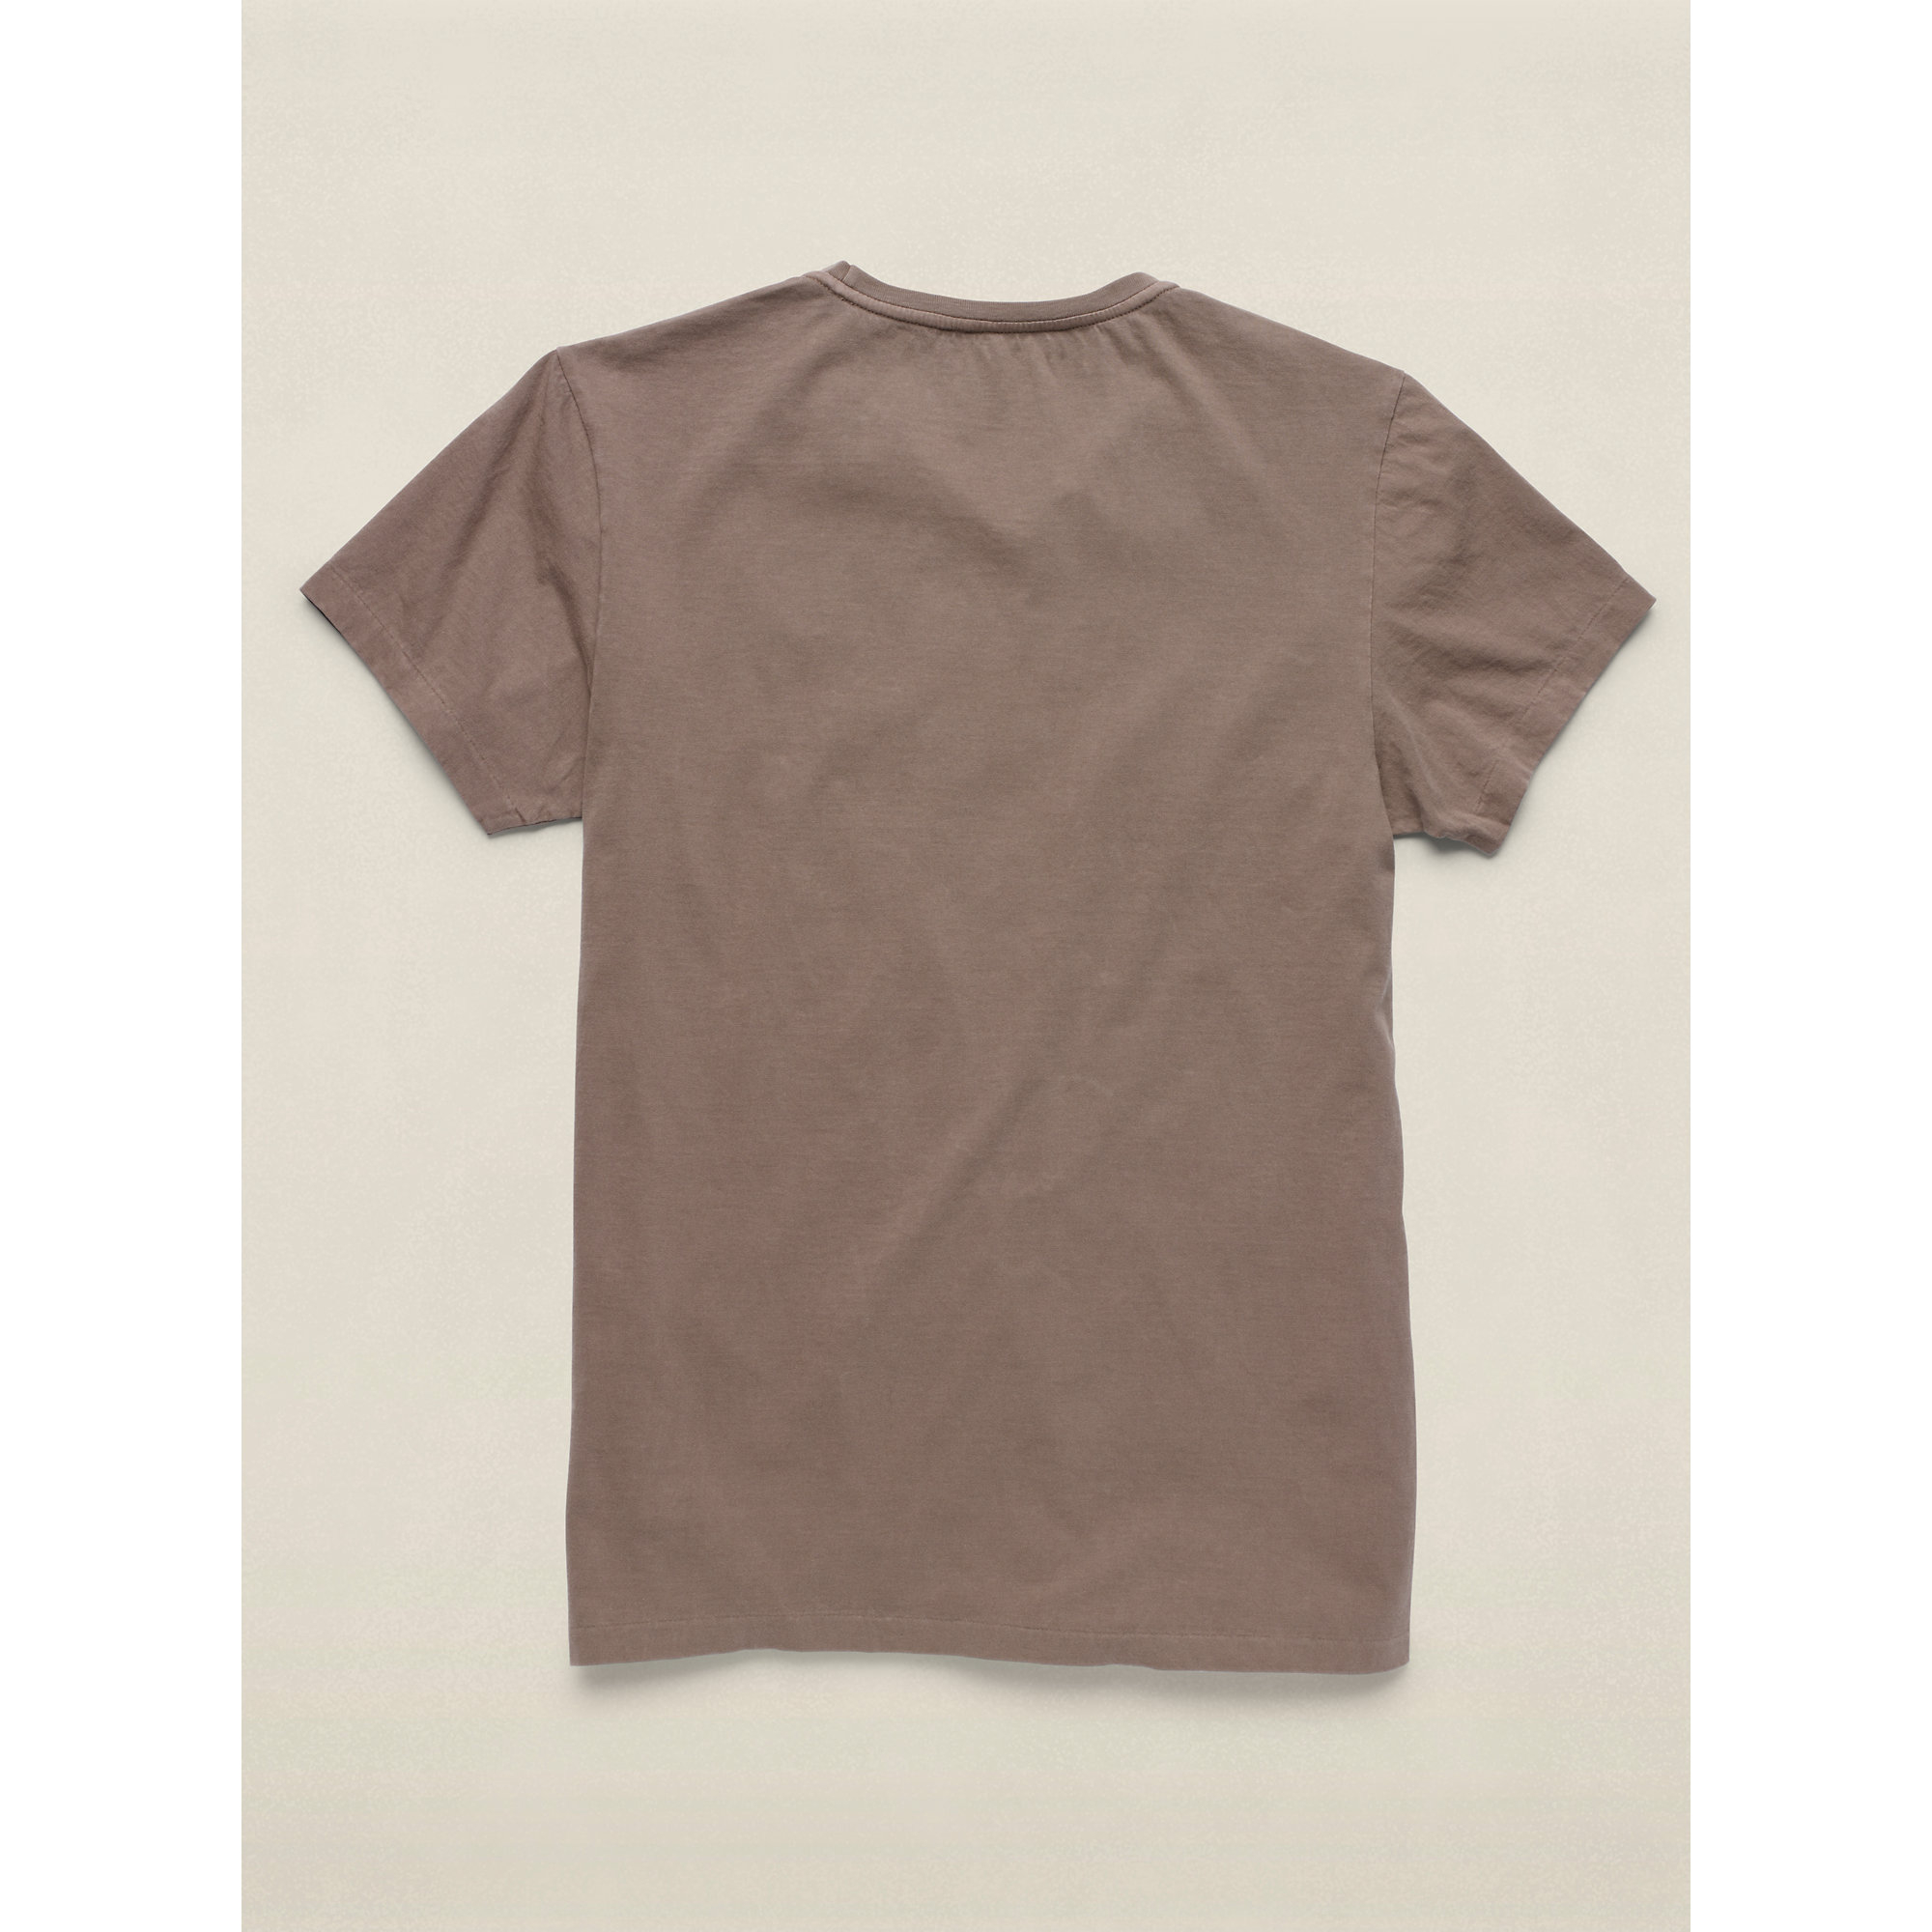 Lyst - Rrl "" Cotton T-Shirt in Brown for Men